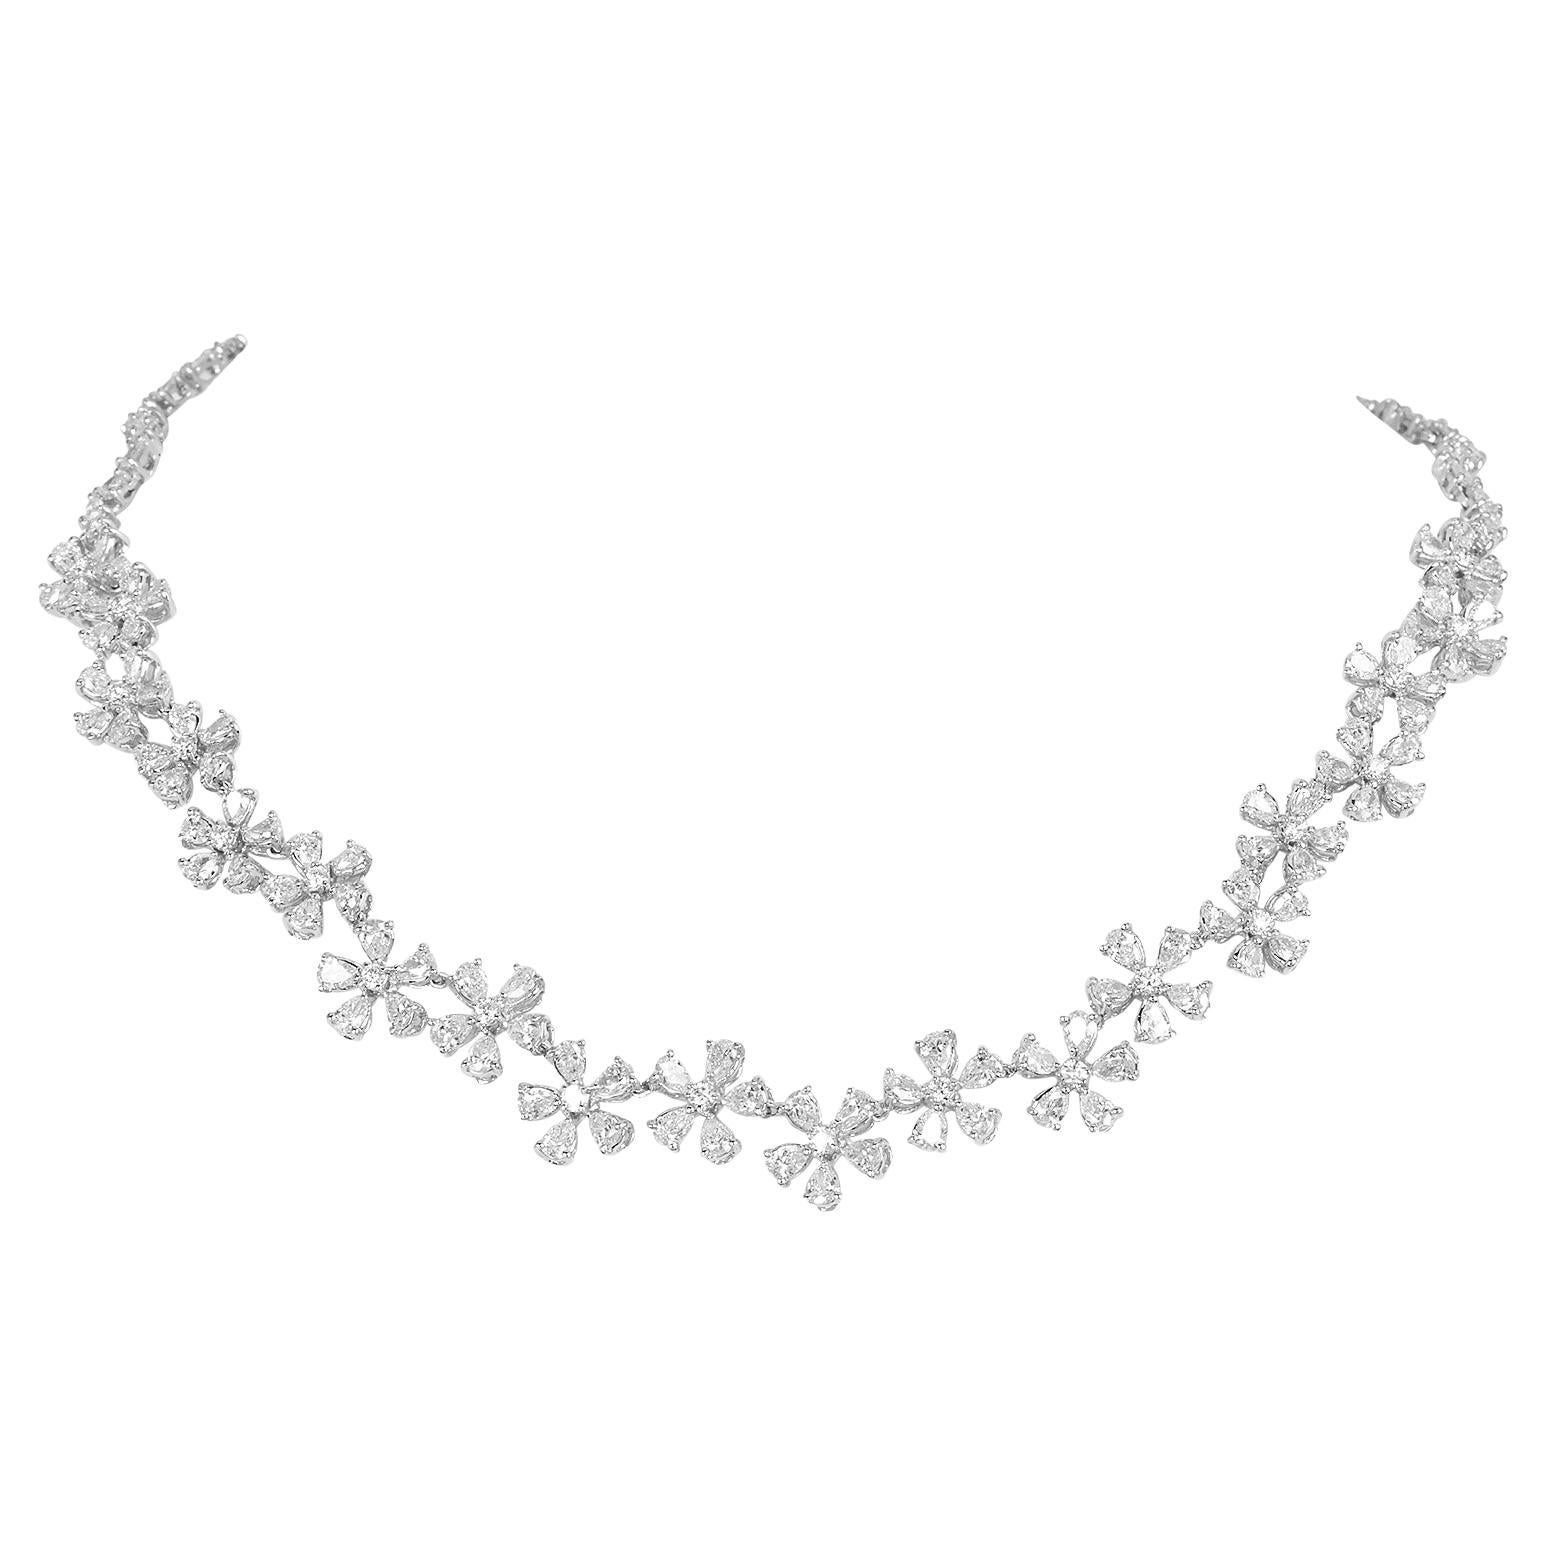 ZYDO 24.50cts Pear Diamond Gold Floral Link Tennis Necklace  For Sale